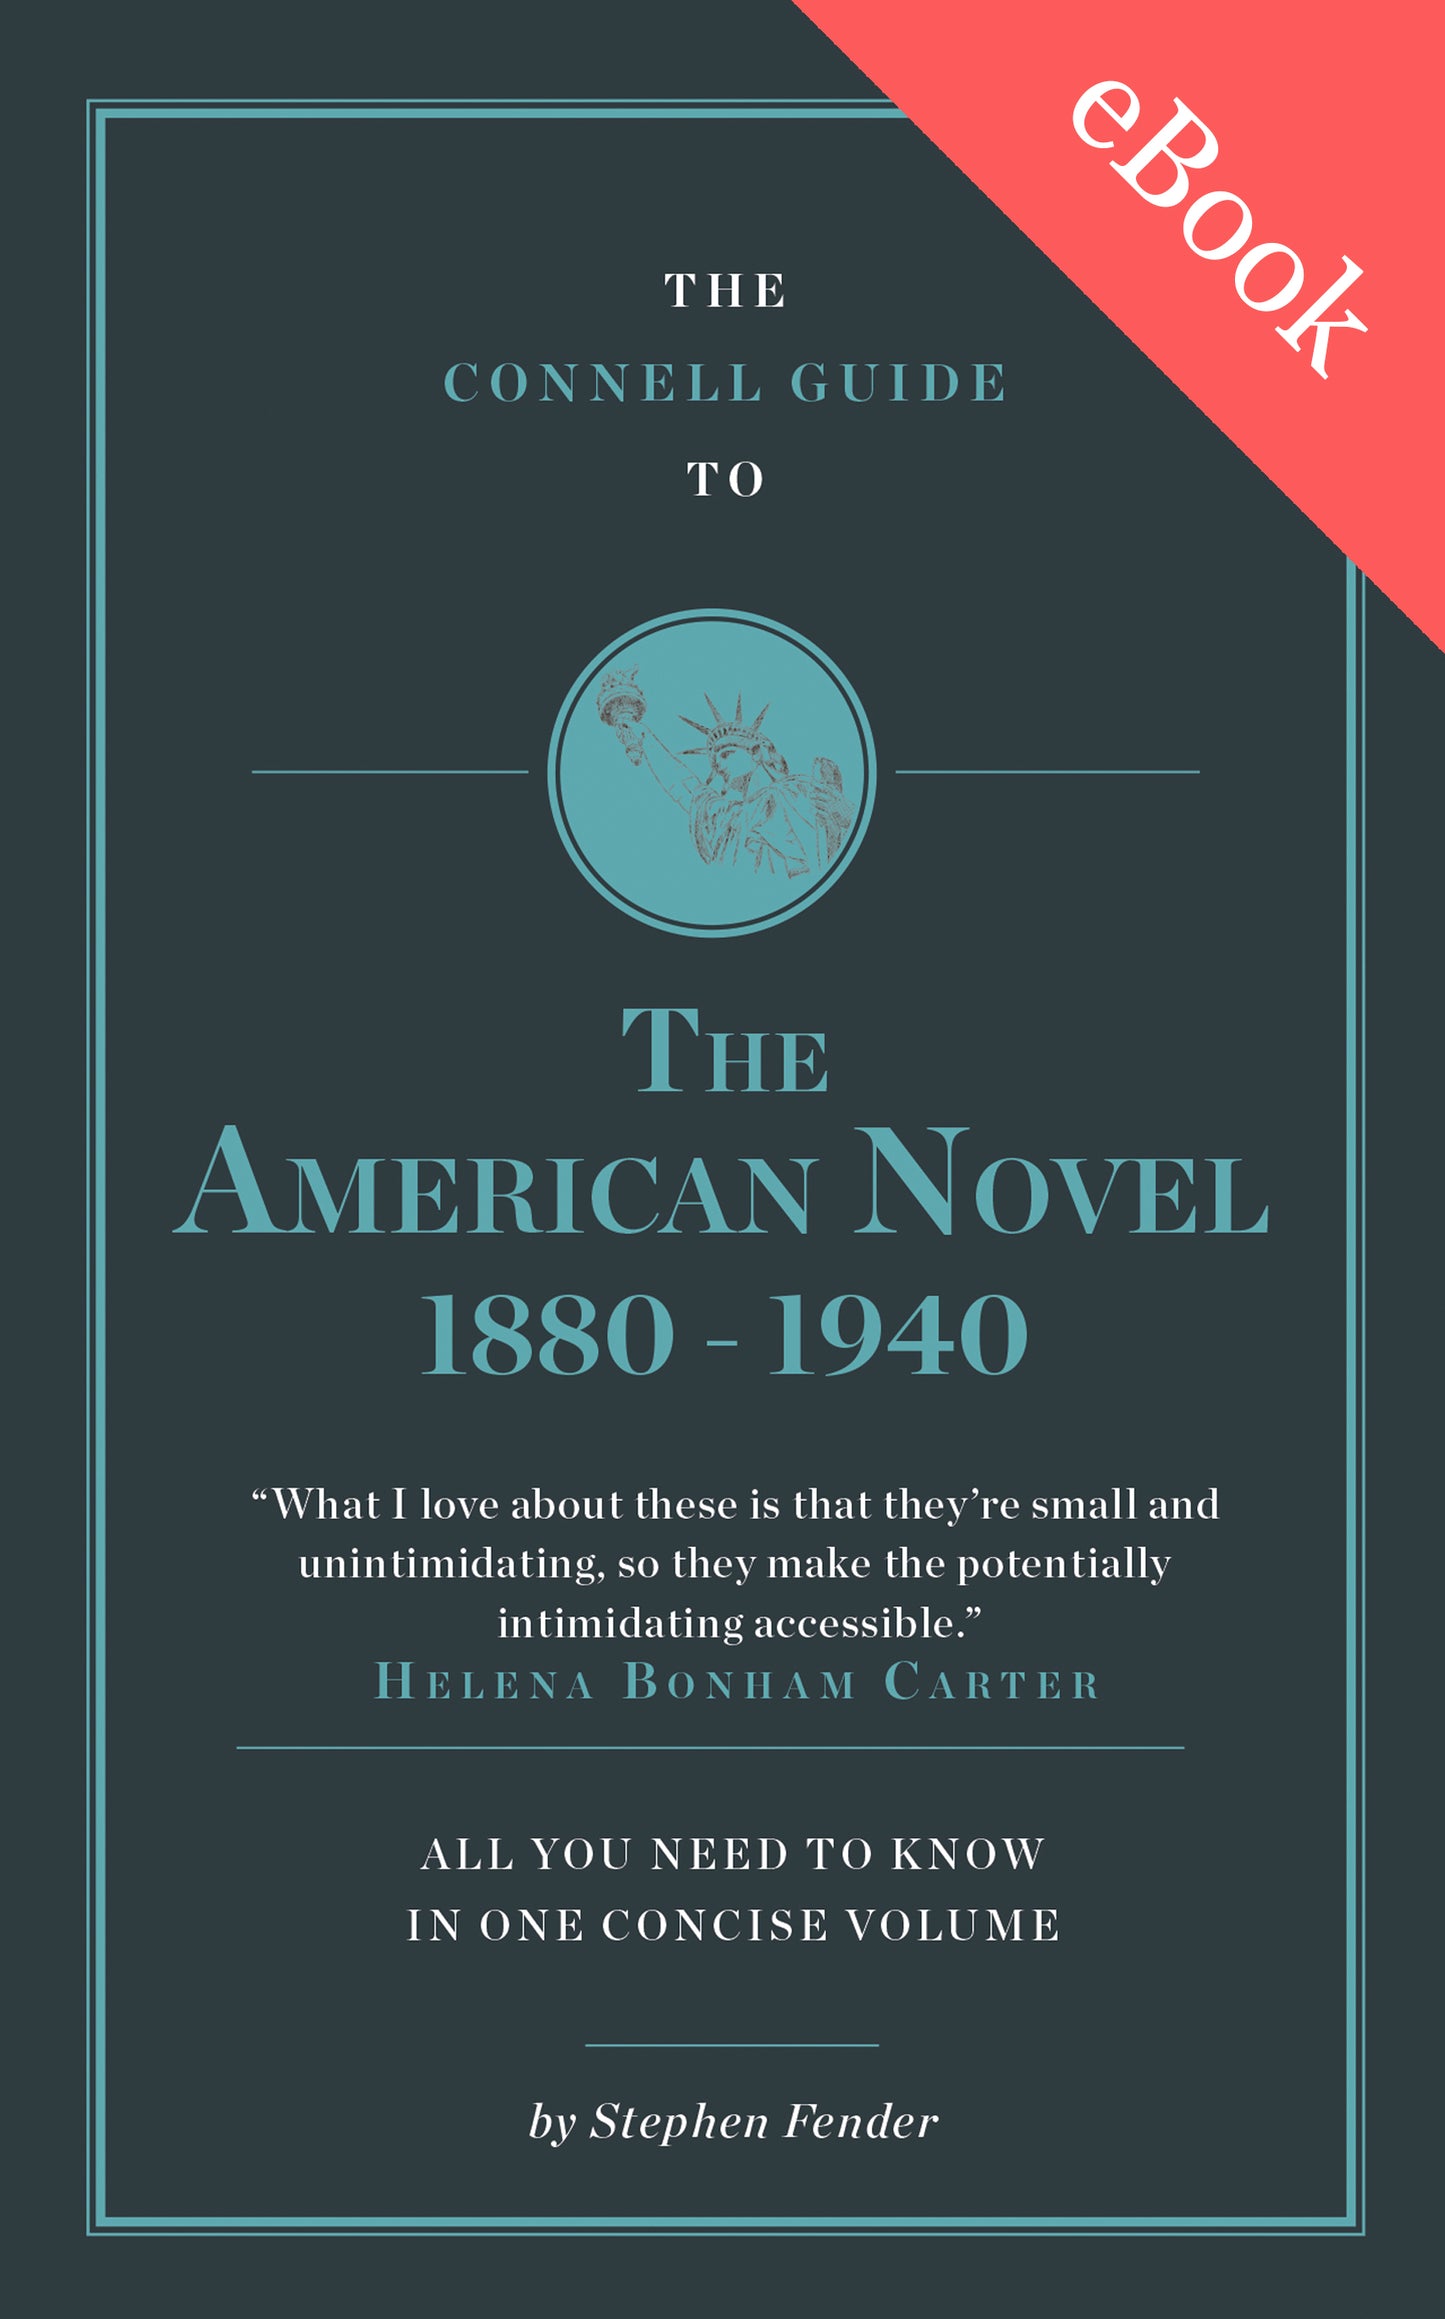 The Connell Guide to The American Novel